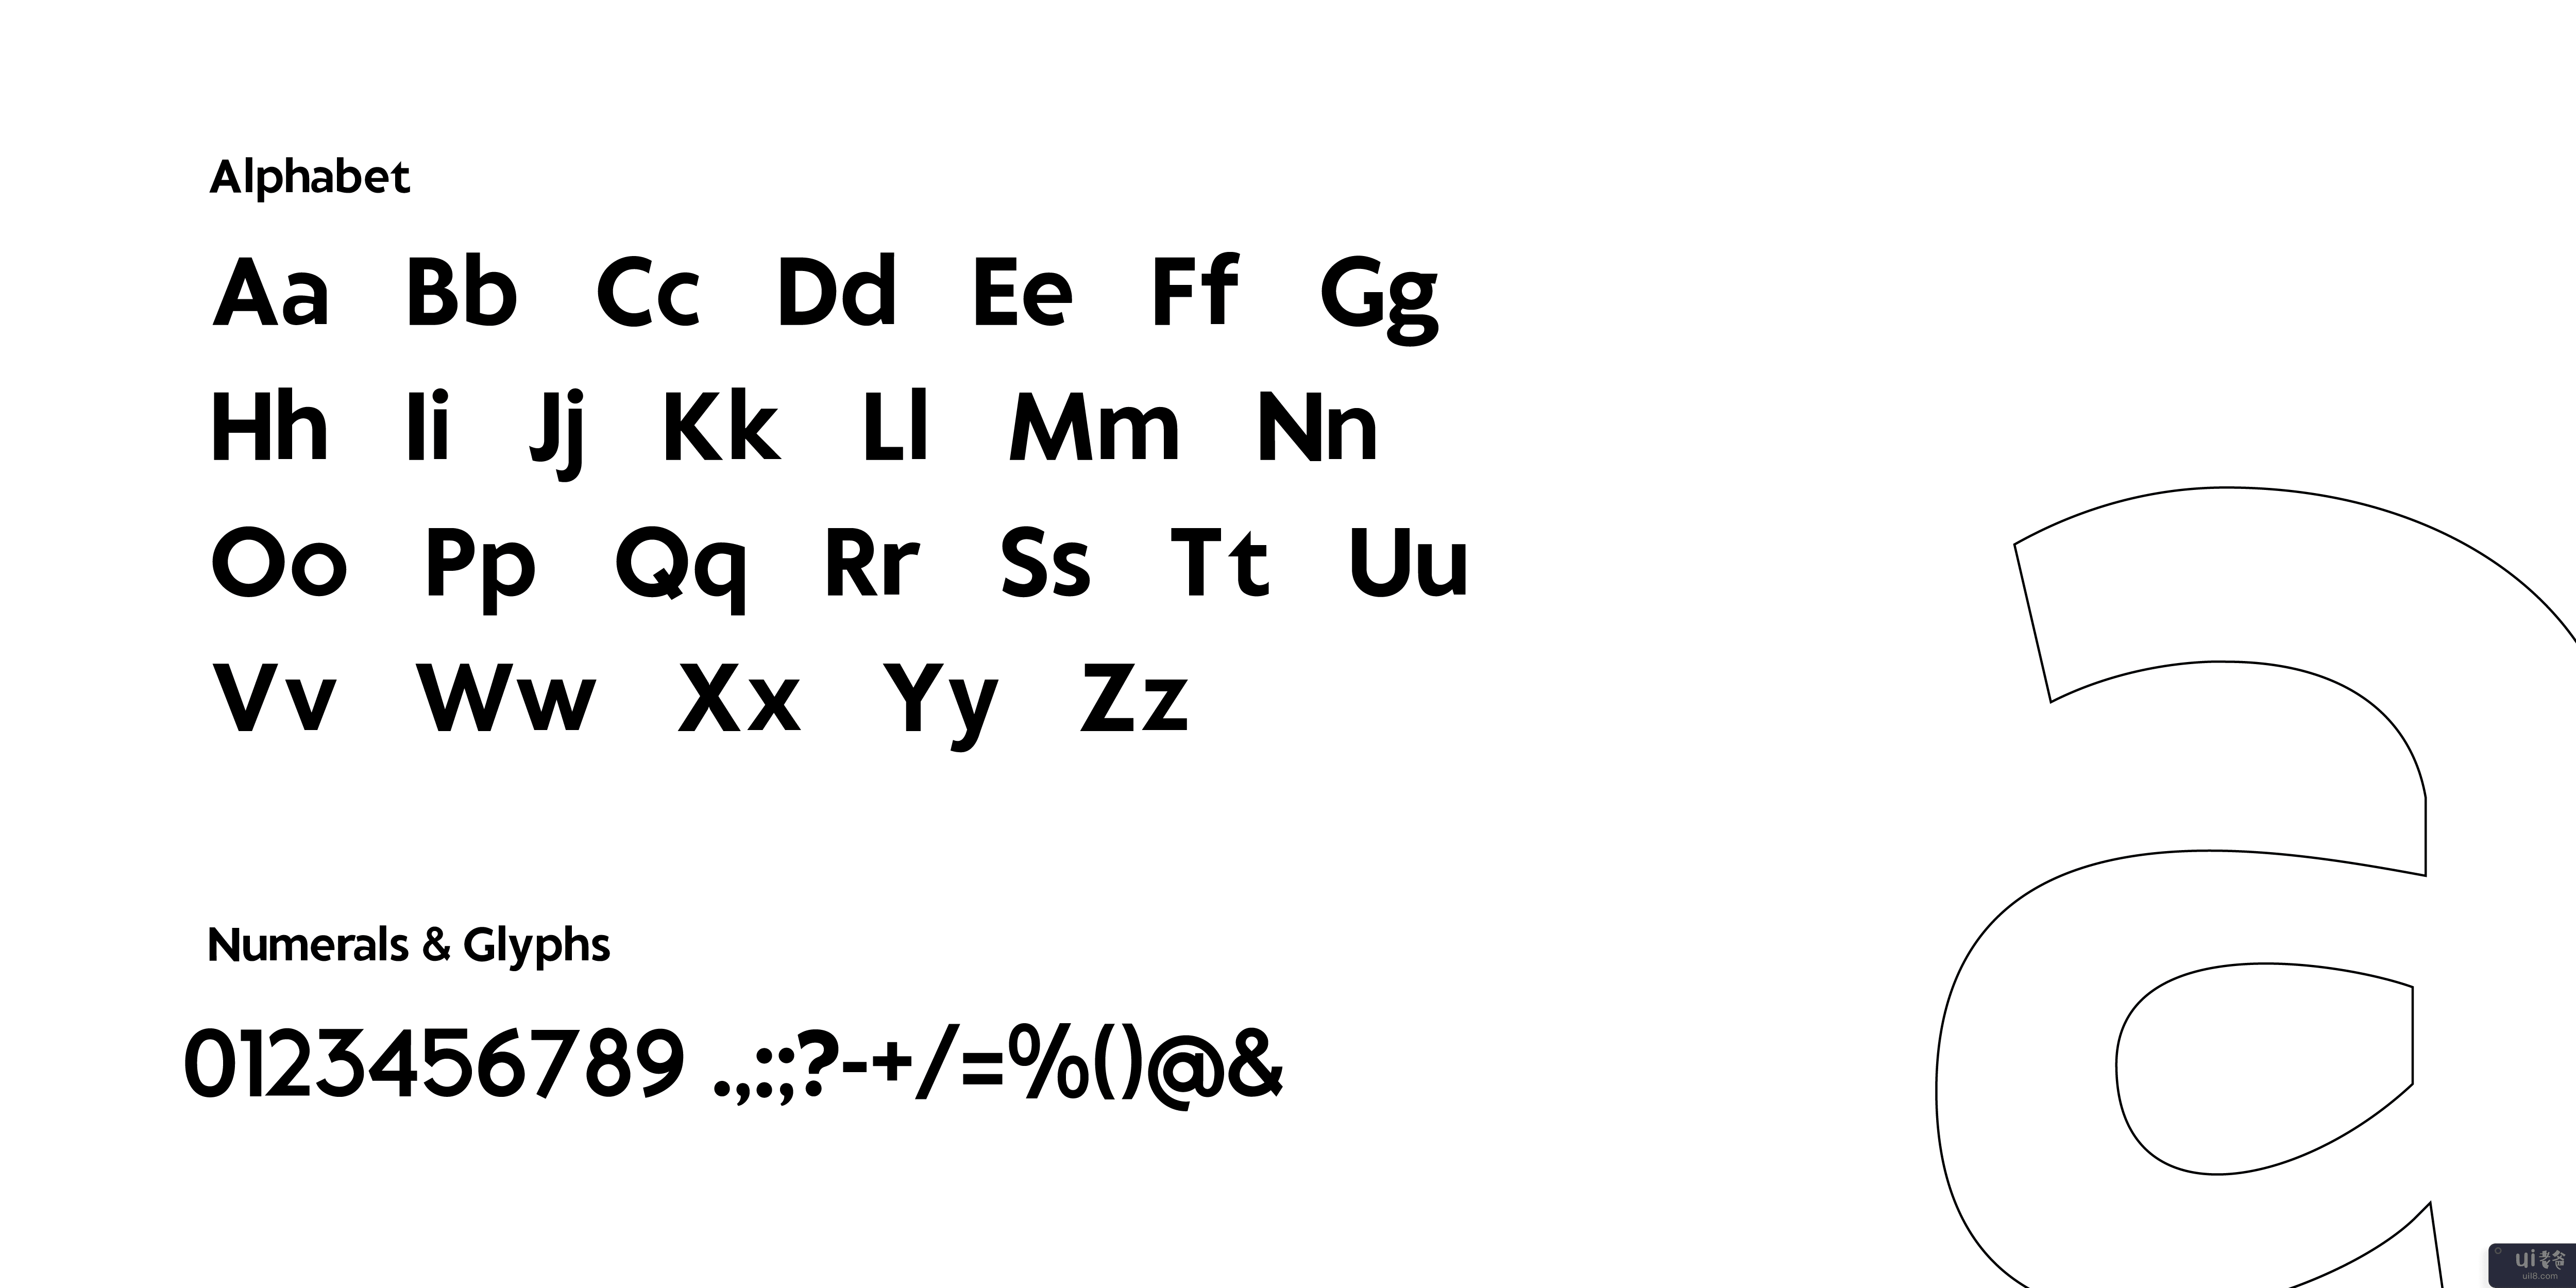 Contisans 字体系列（3 个粗细）(Contisans Font Family (3 weights))插图2